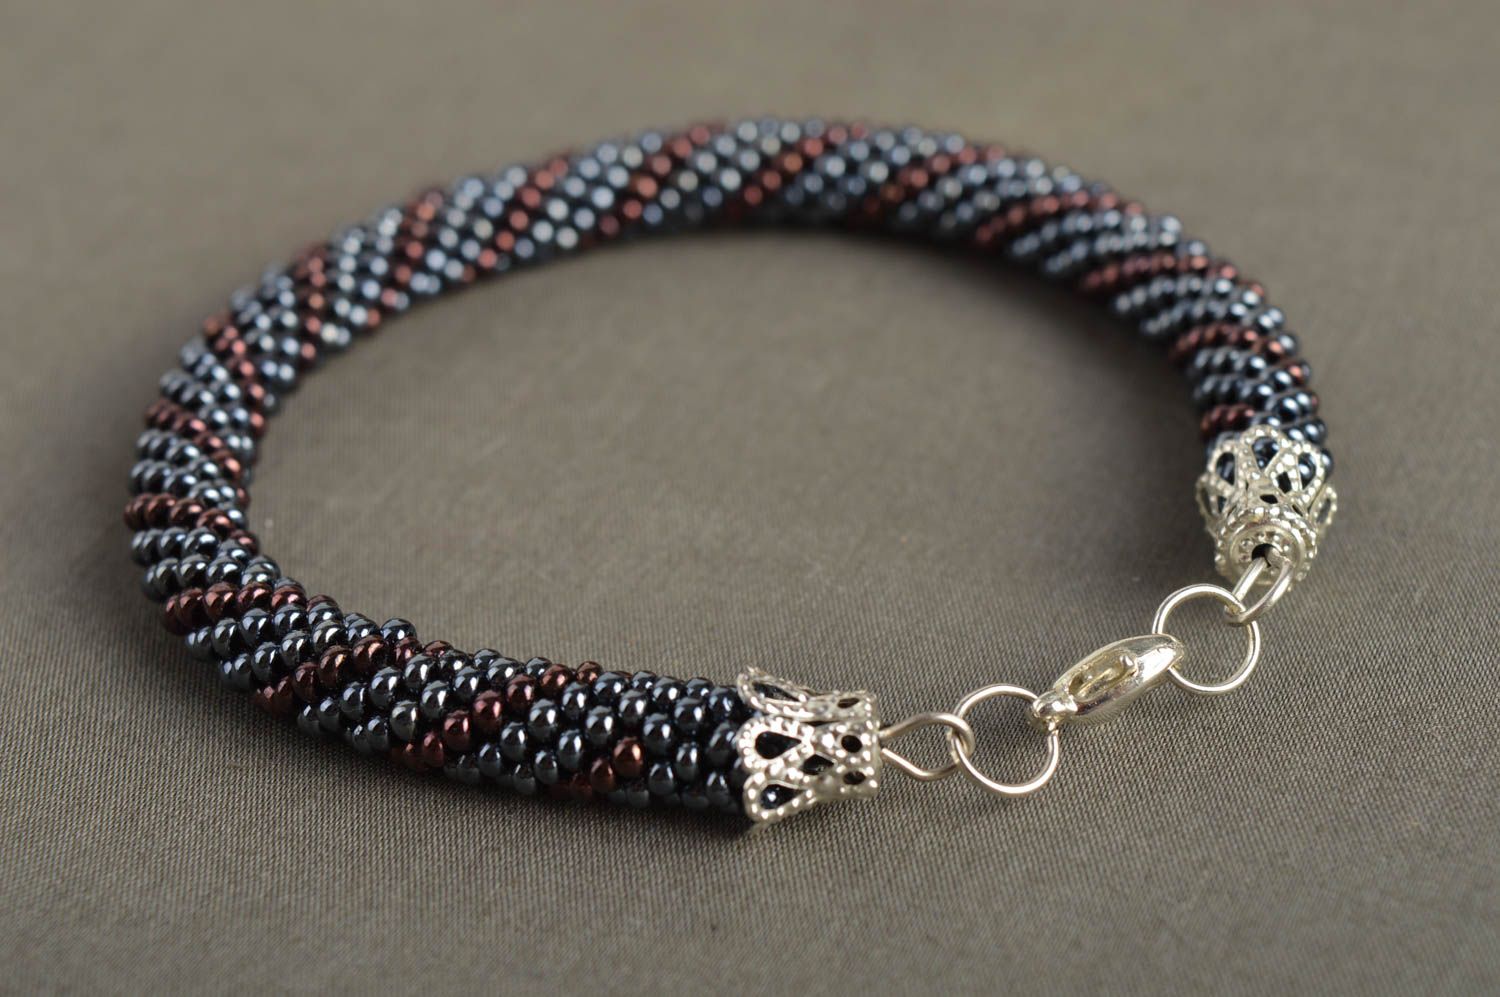 Handmade beaded cord bracelet in silver and dark cherry color photo 1